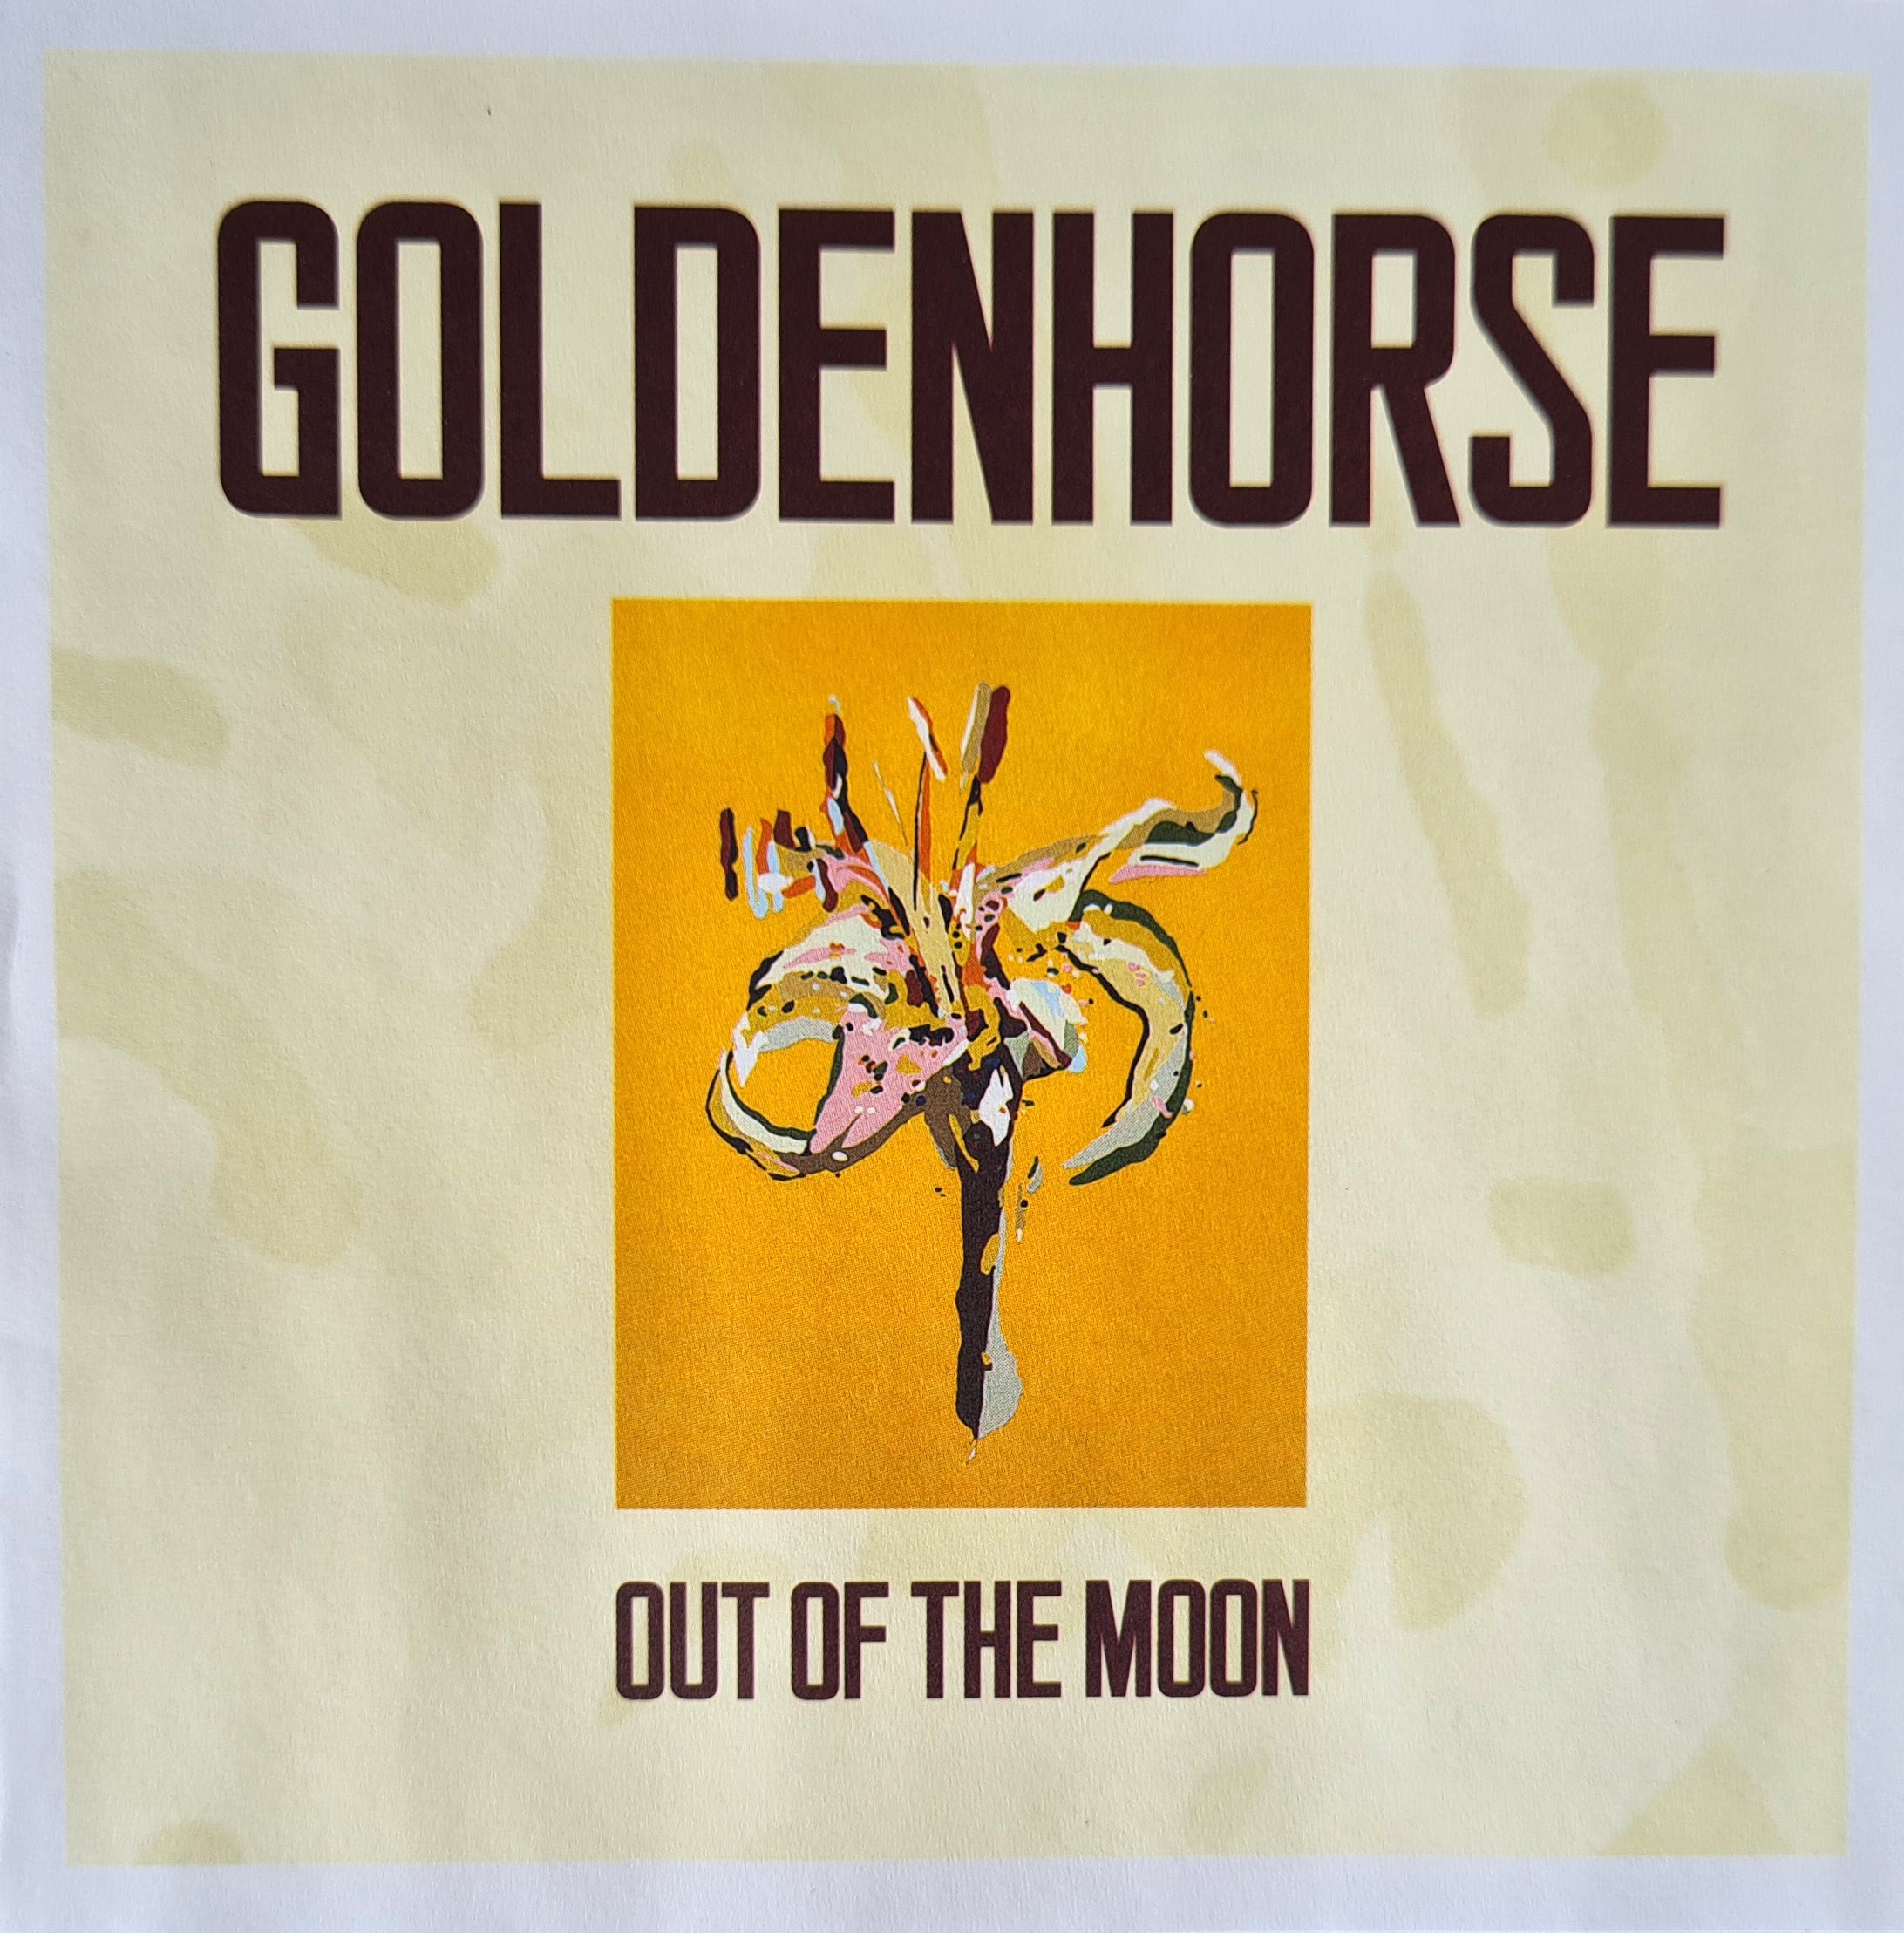 Goldenhorse - Out of the Moon (CD)